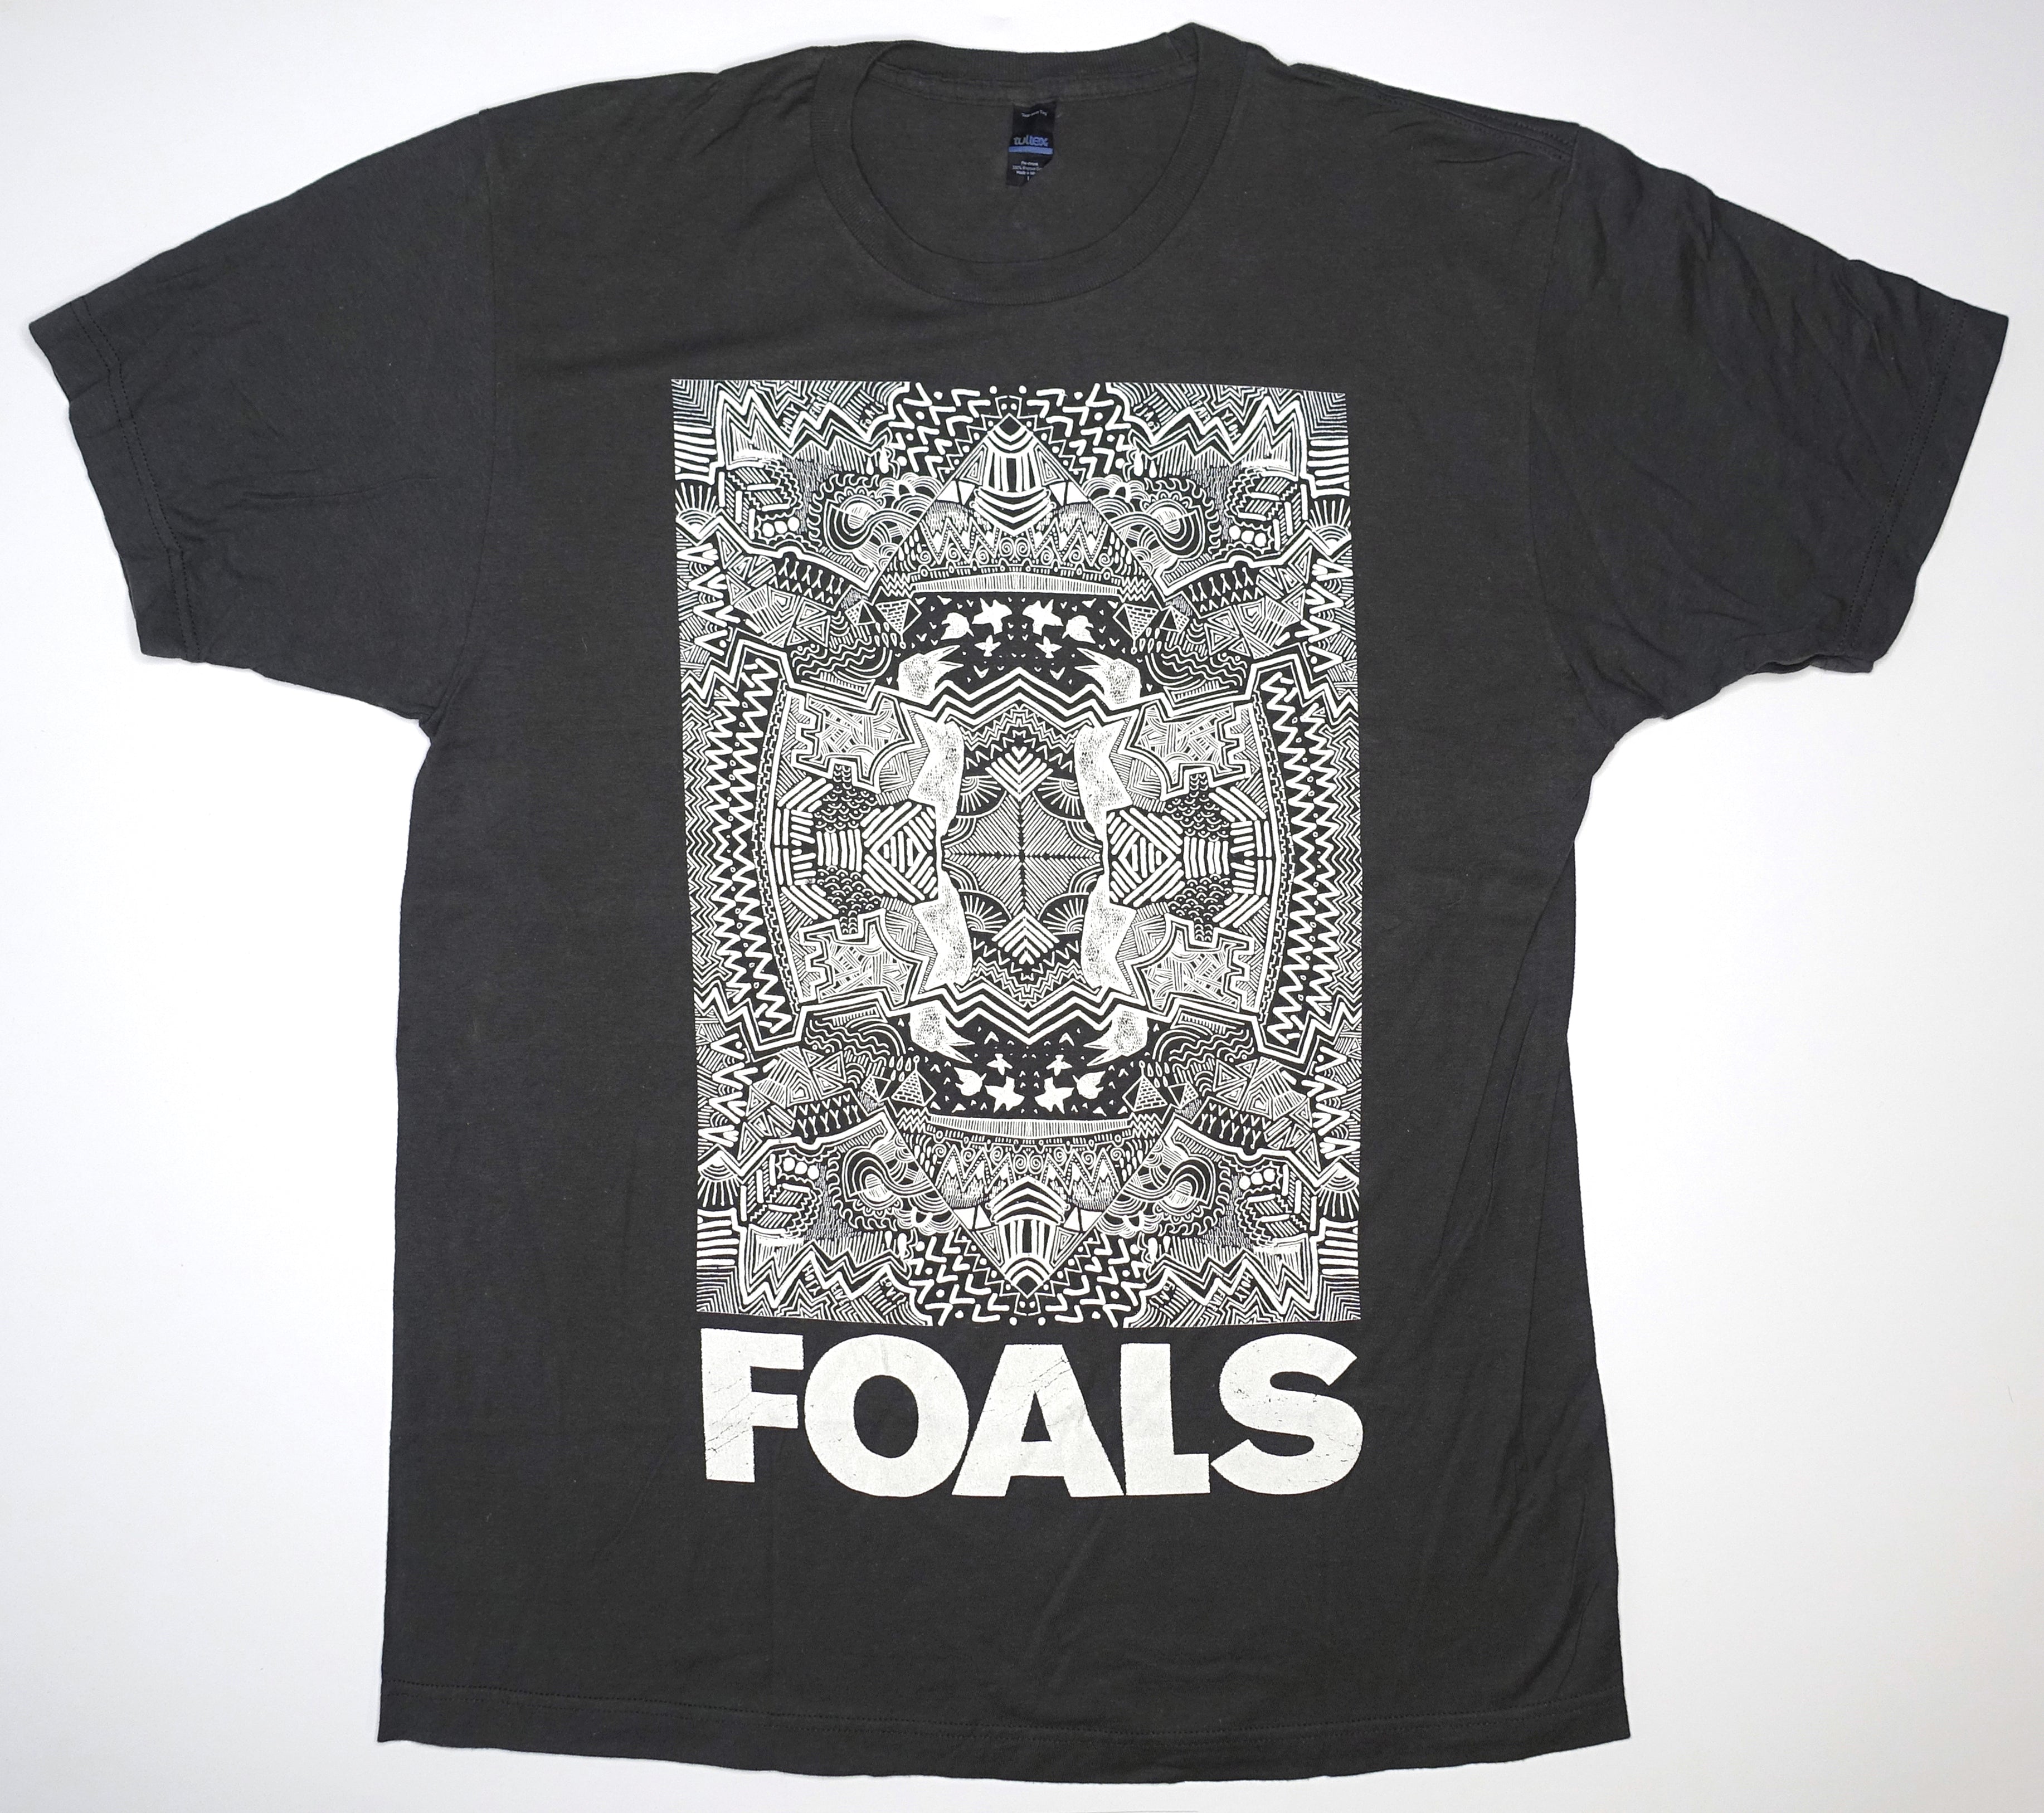 Foals - Holy Fire 2013 Tour Shirt Size Large